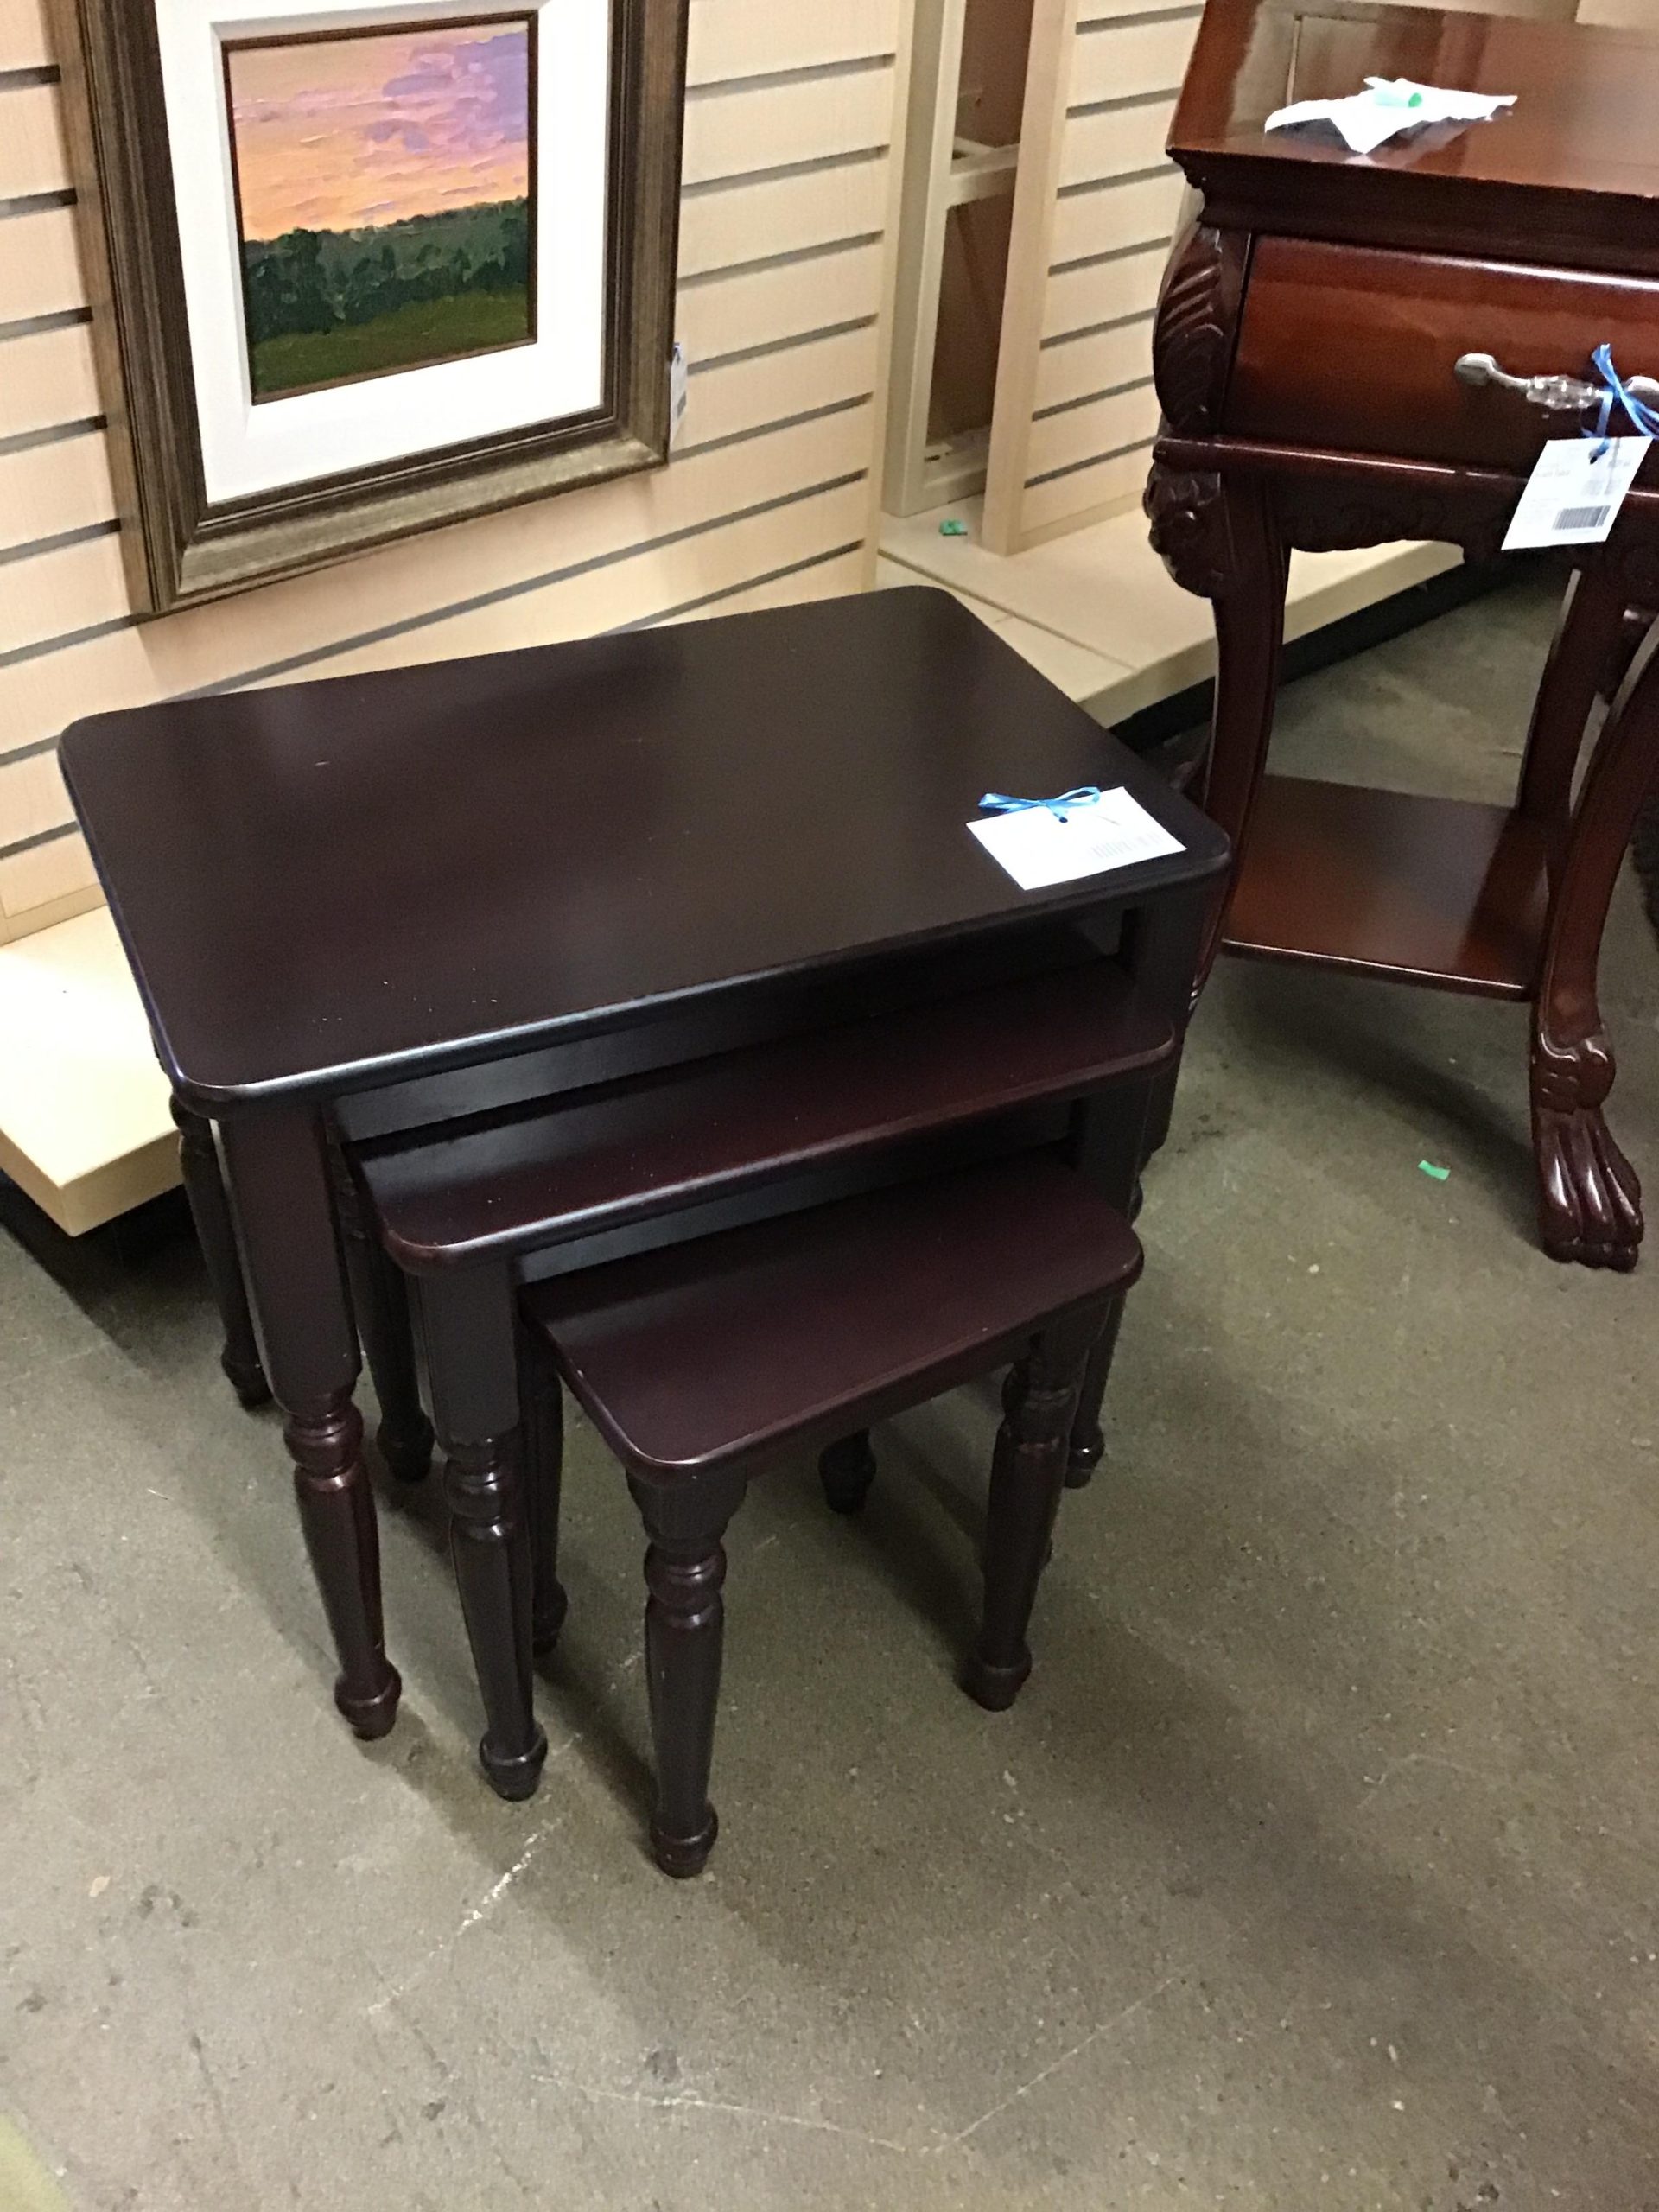 Nesting Tables – Condition